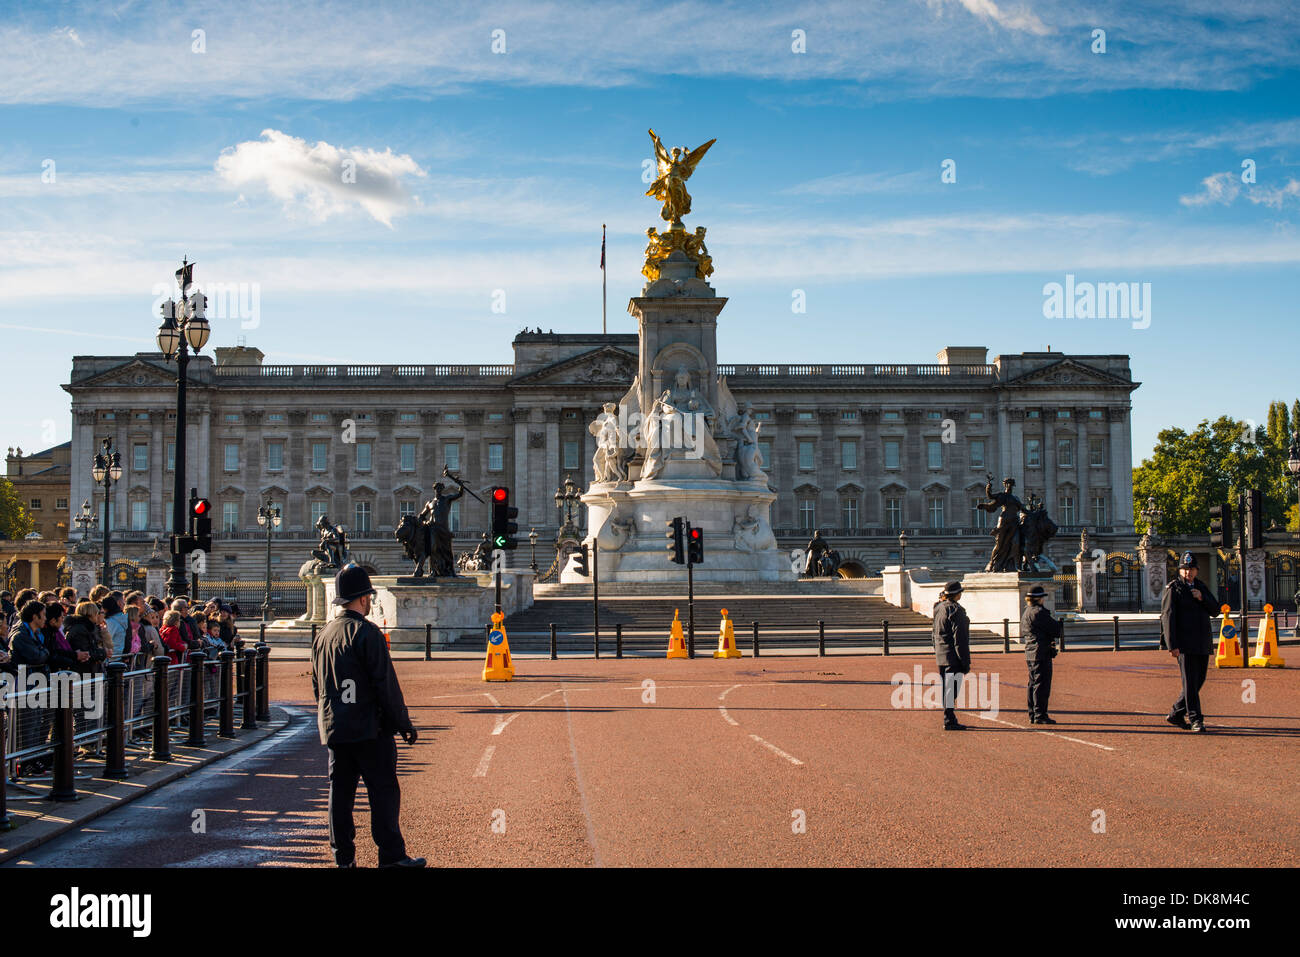 Buckingham palace and a lot of people Stock Photo